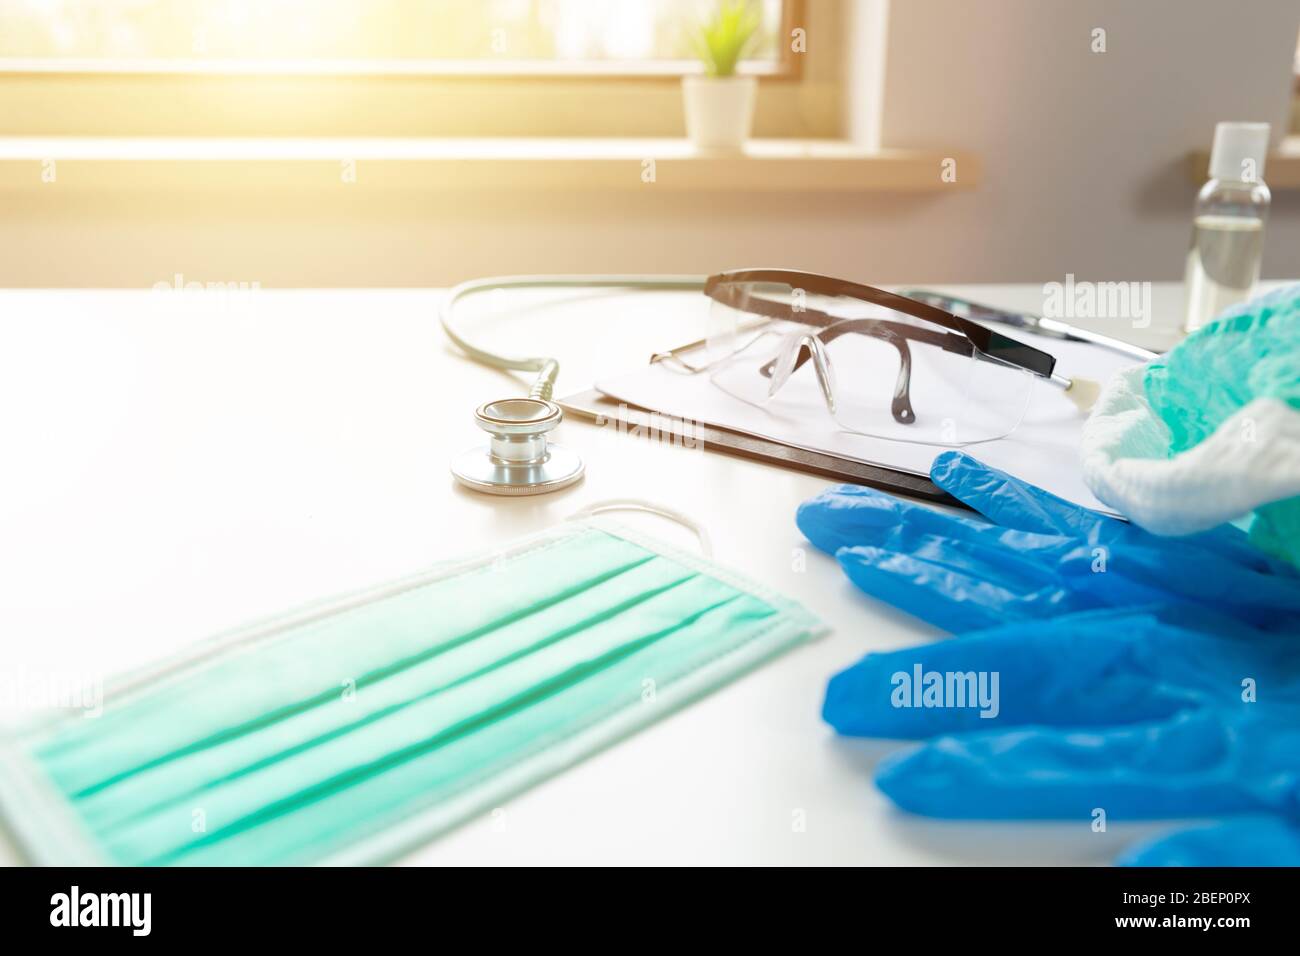 Doctors and nurses protection kit on a white table with sunny window Stock Photo